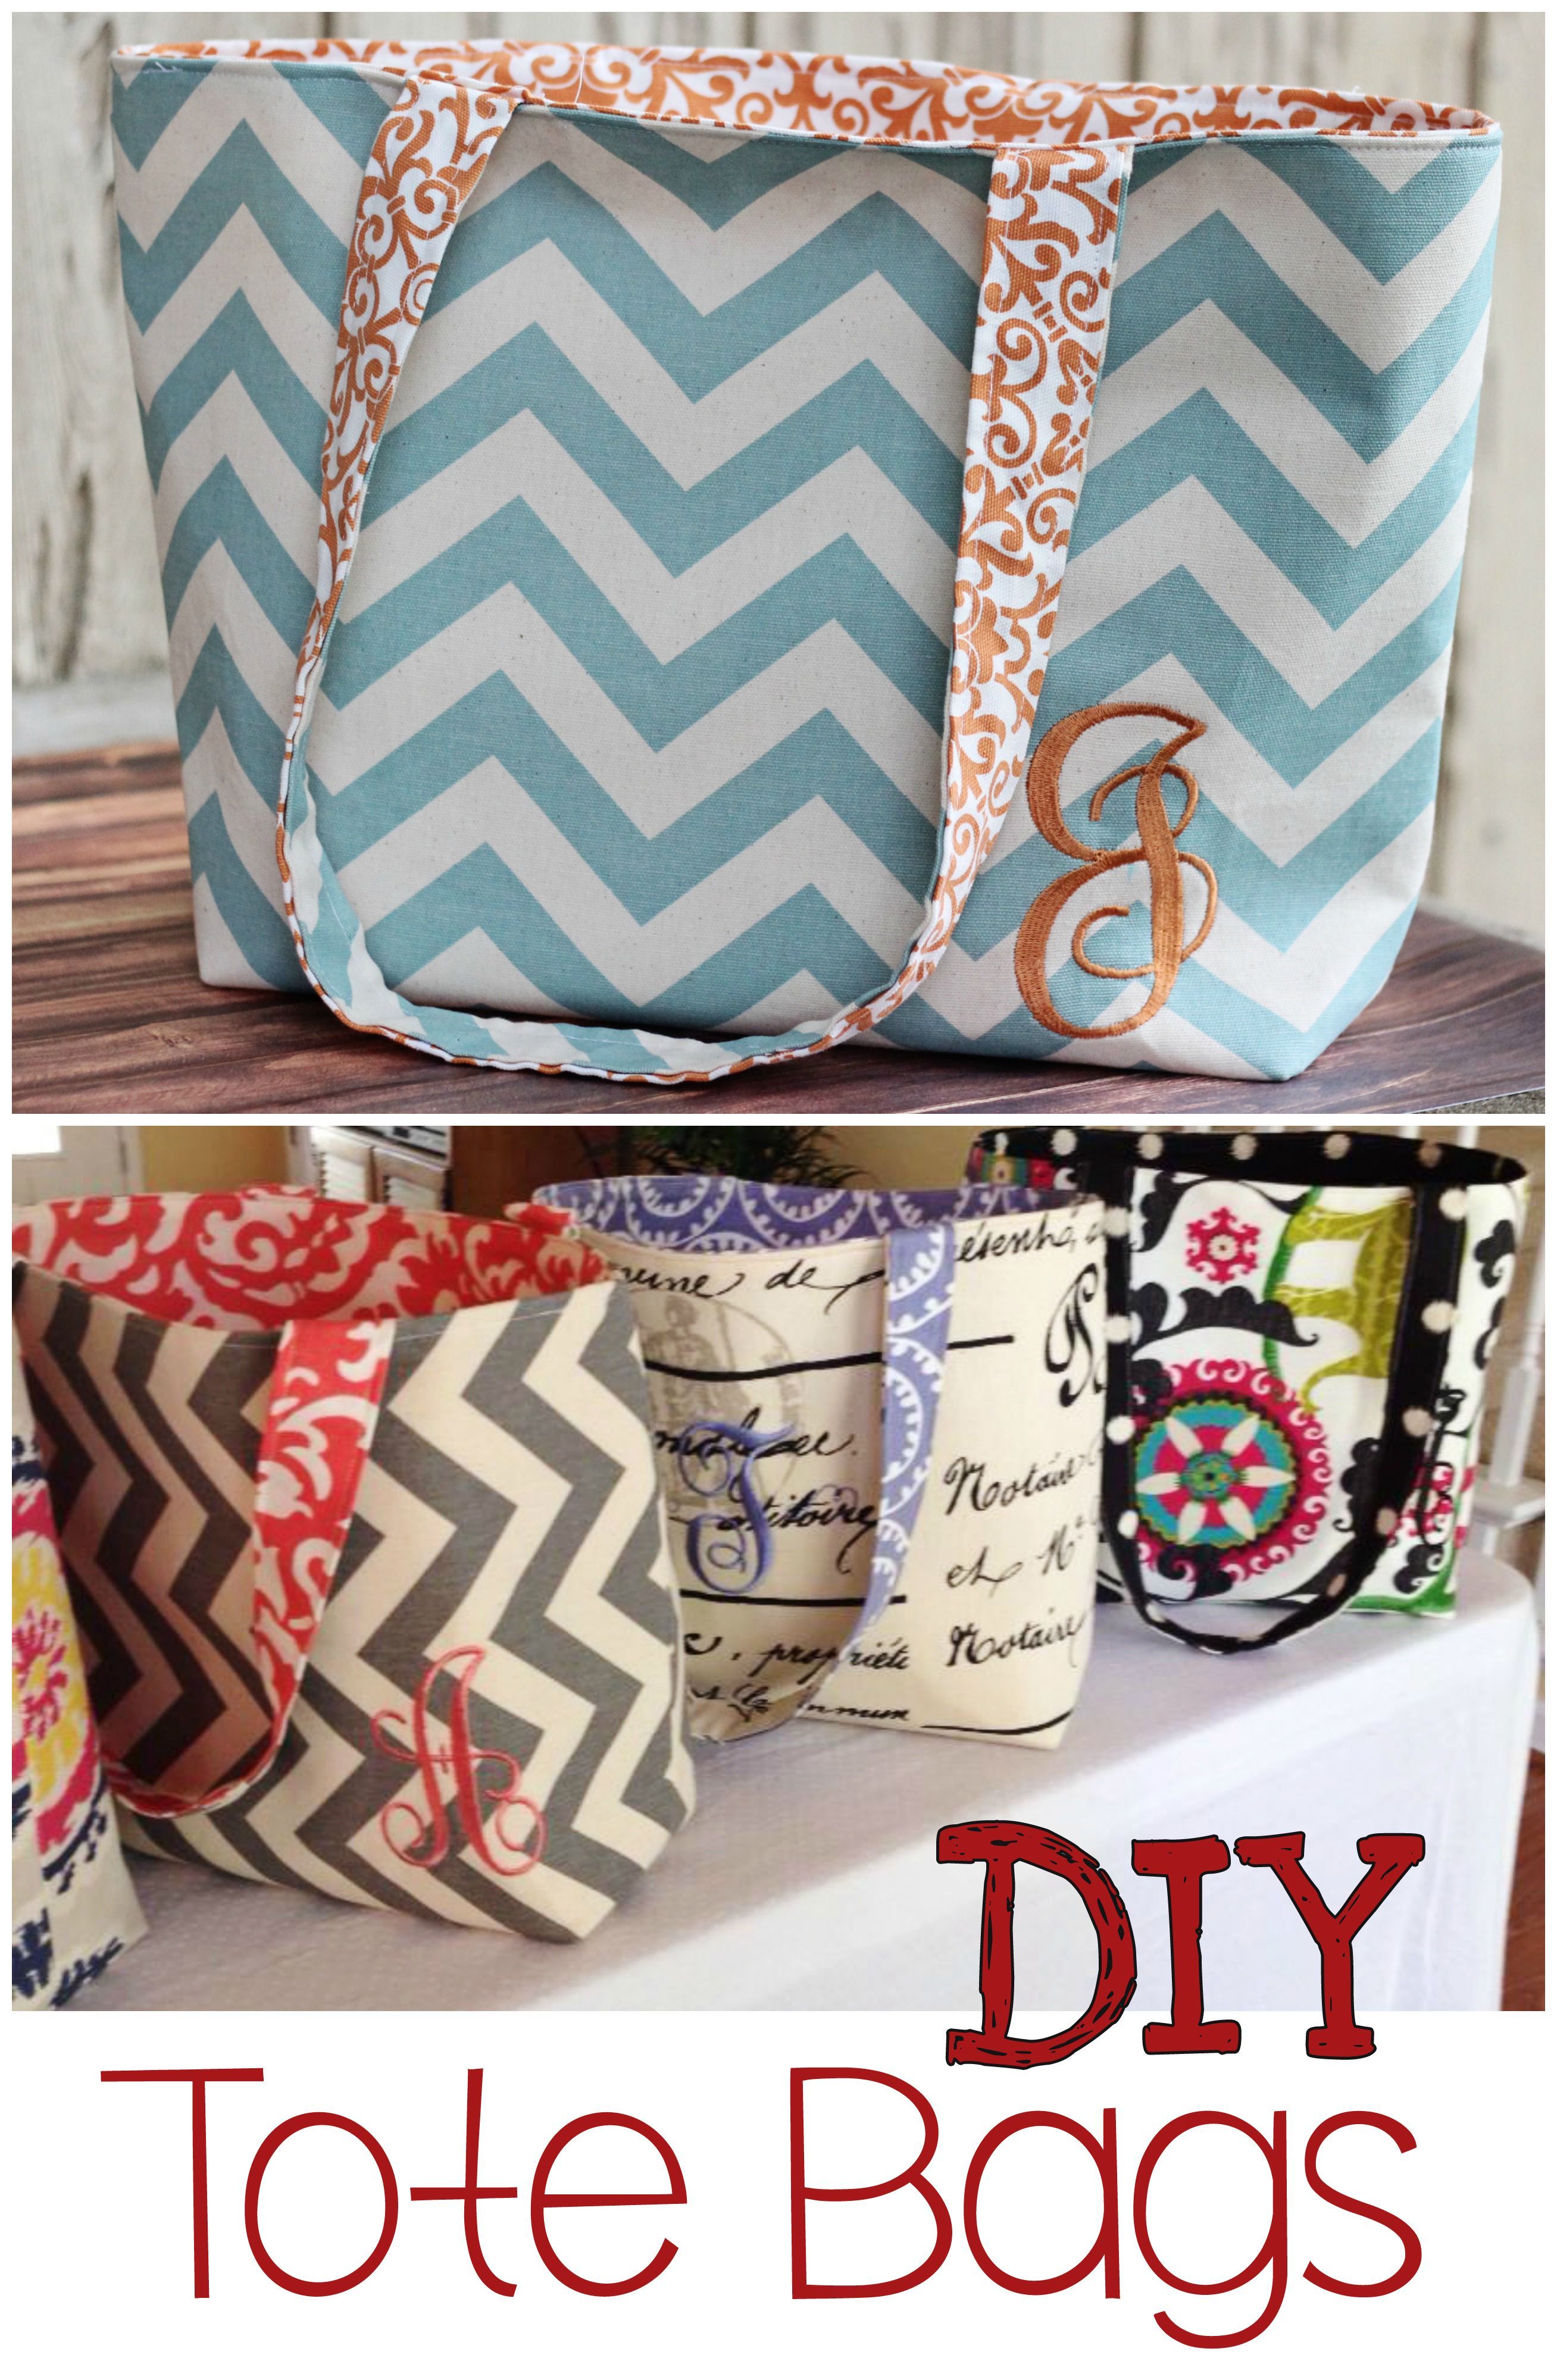 This DIY tote is easy-sew a